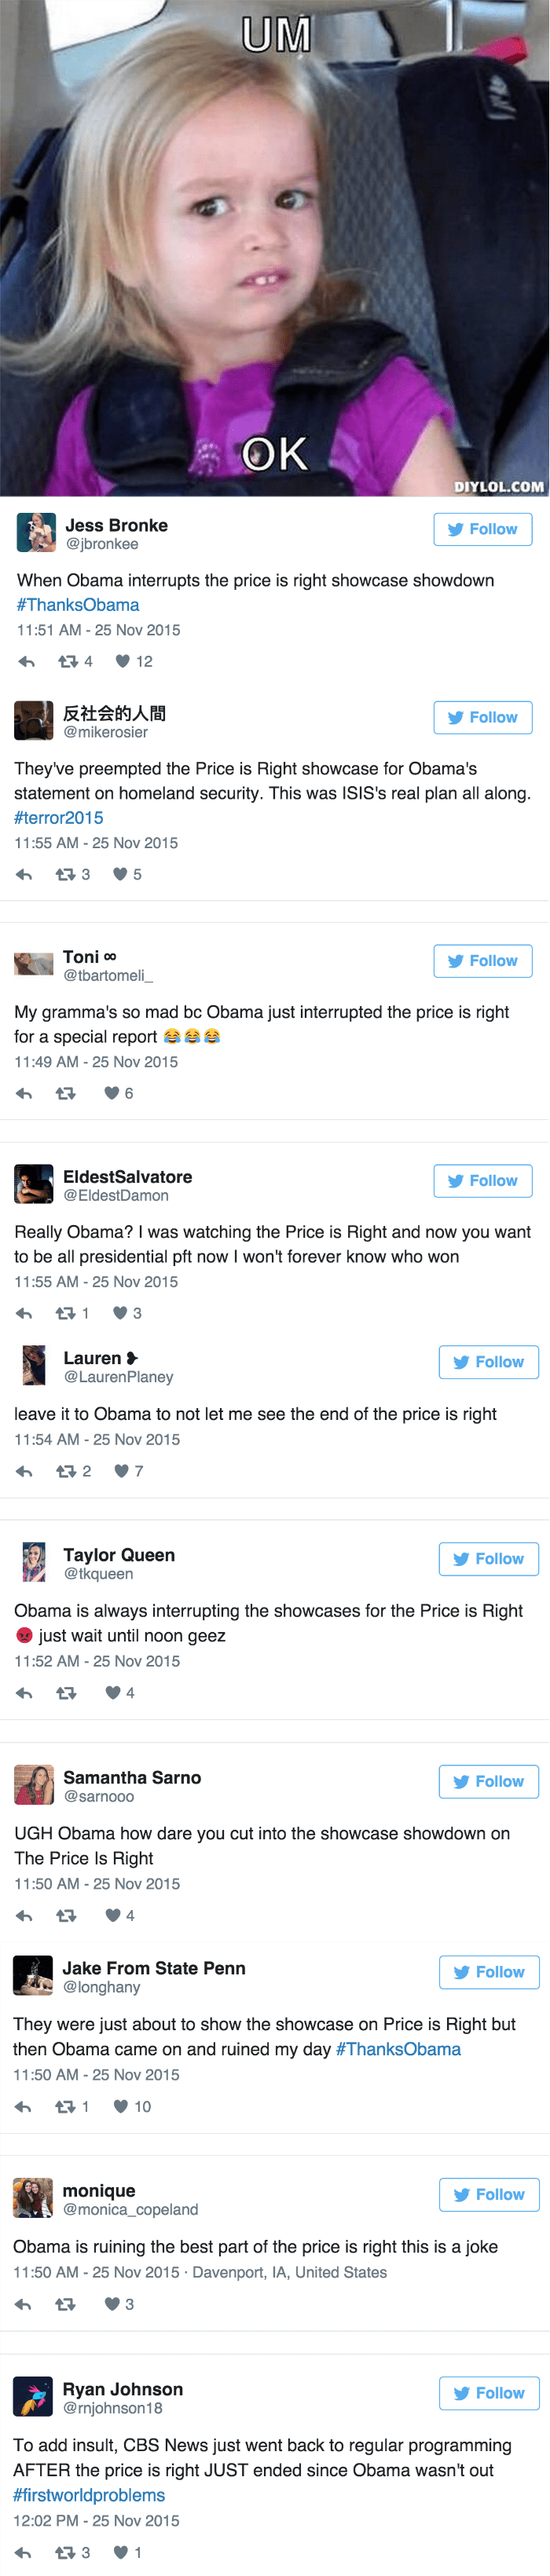 social media fail POTUS interrupts ending of Price is Right and pays a price on Twitter